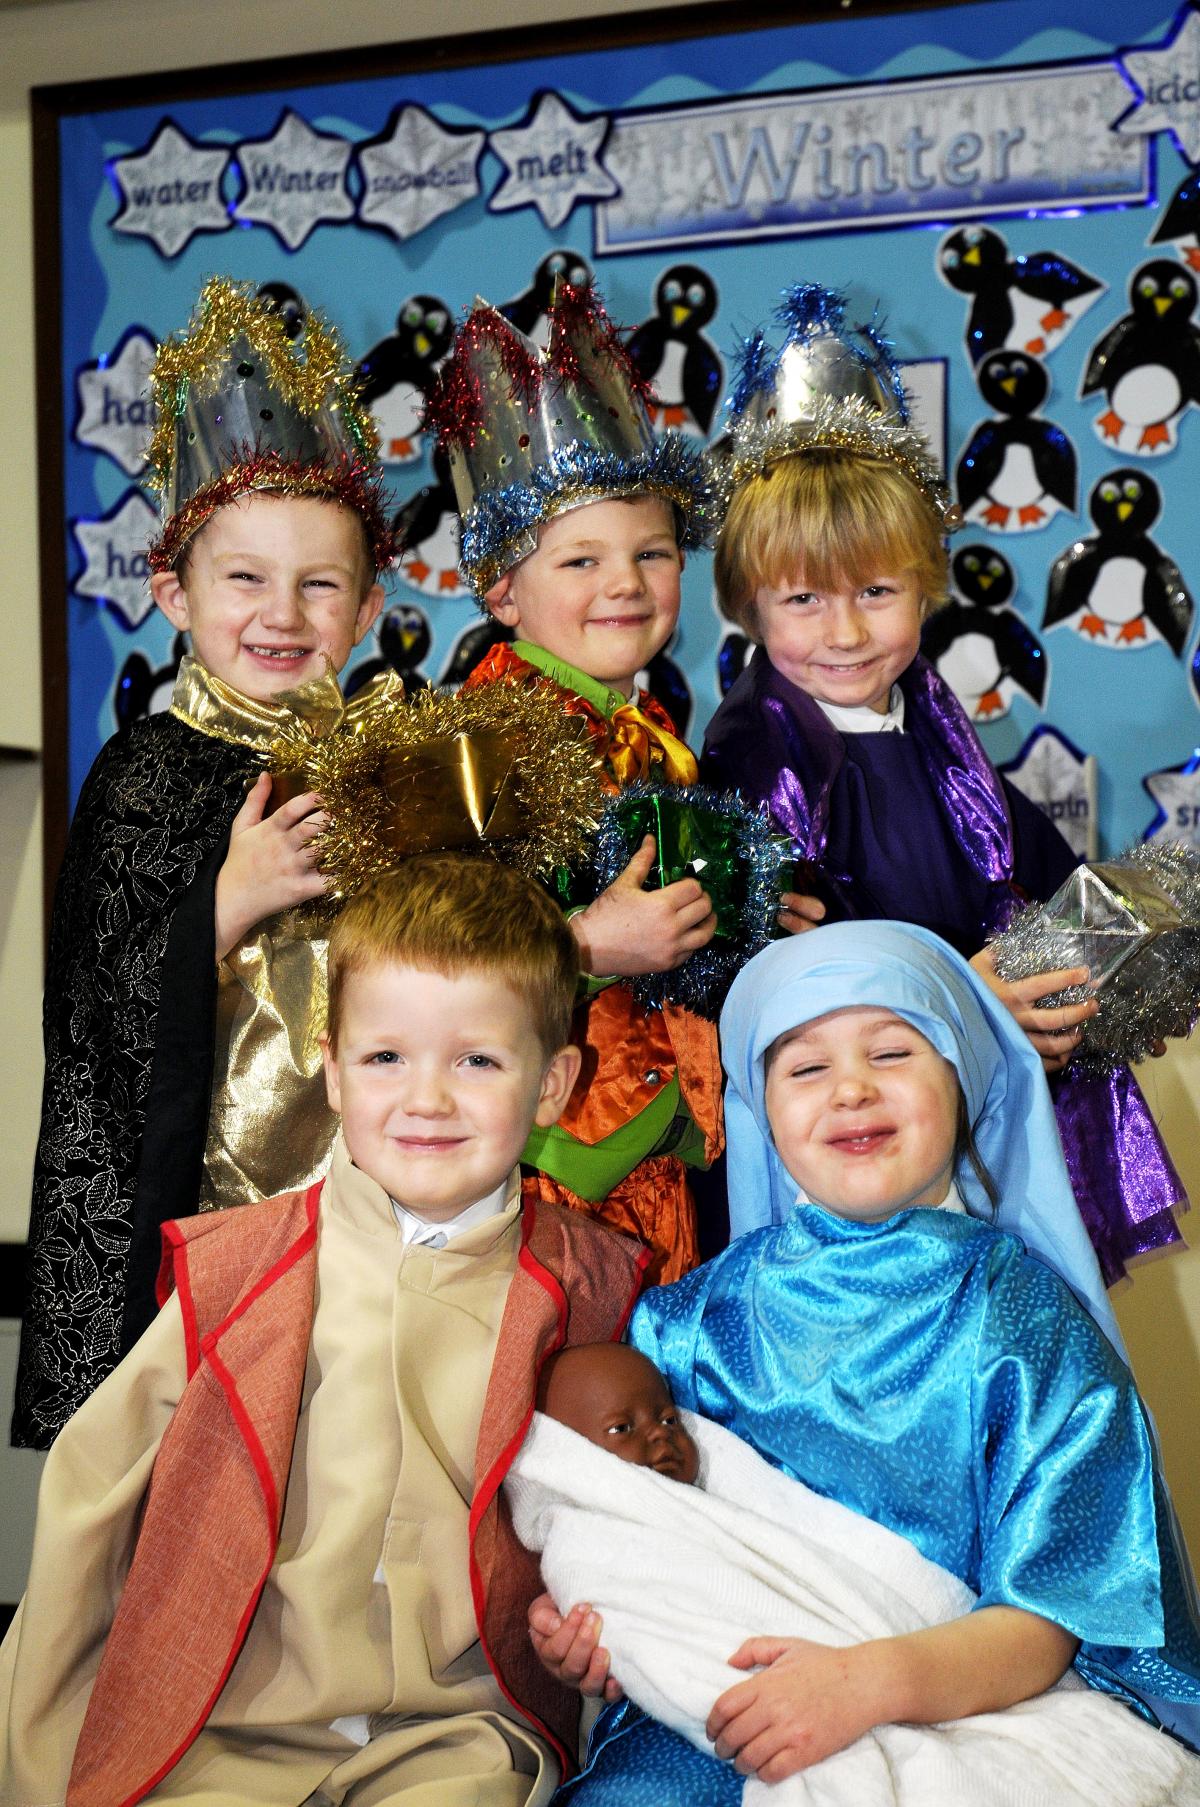 Front, Niamh Waterworth and Charlie Greenwood (Mary and Joseph), back, the Three Kings, from the left, Kieran Coleman, Hugo Beatham and Logan Tinkler